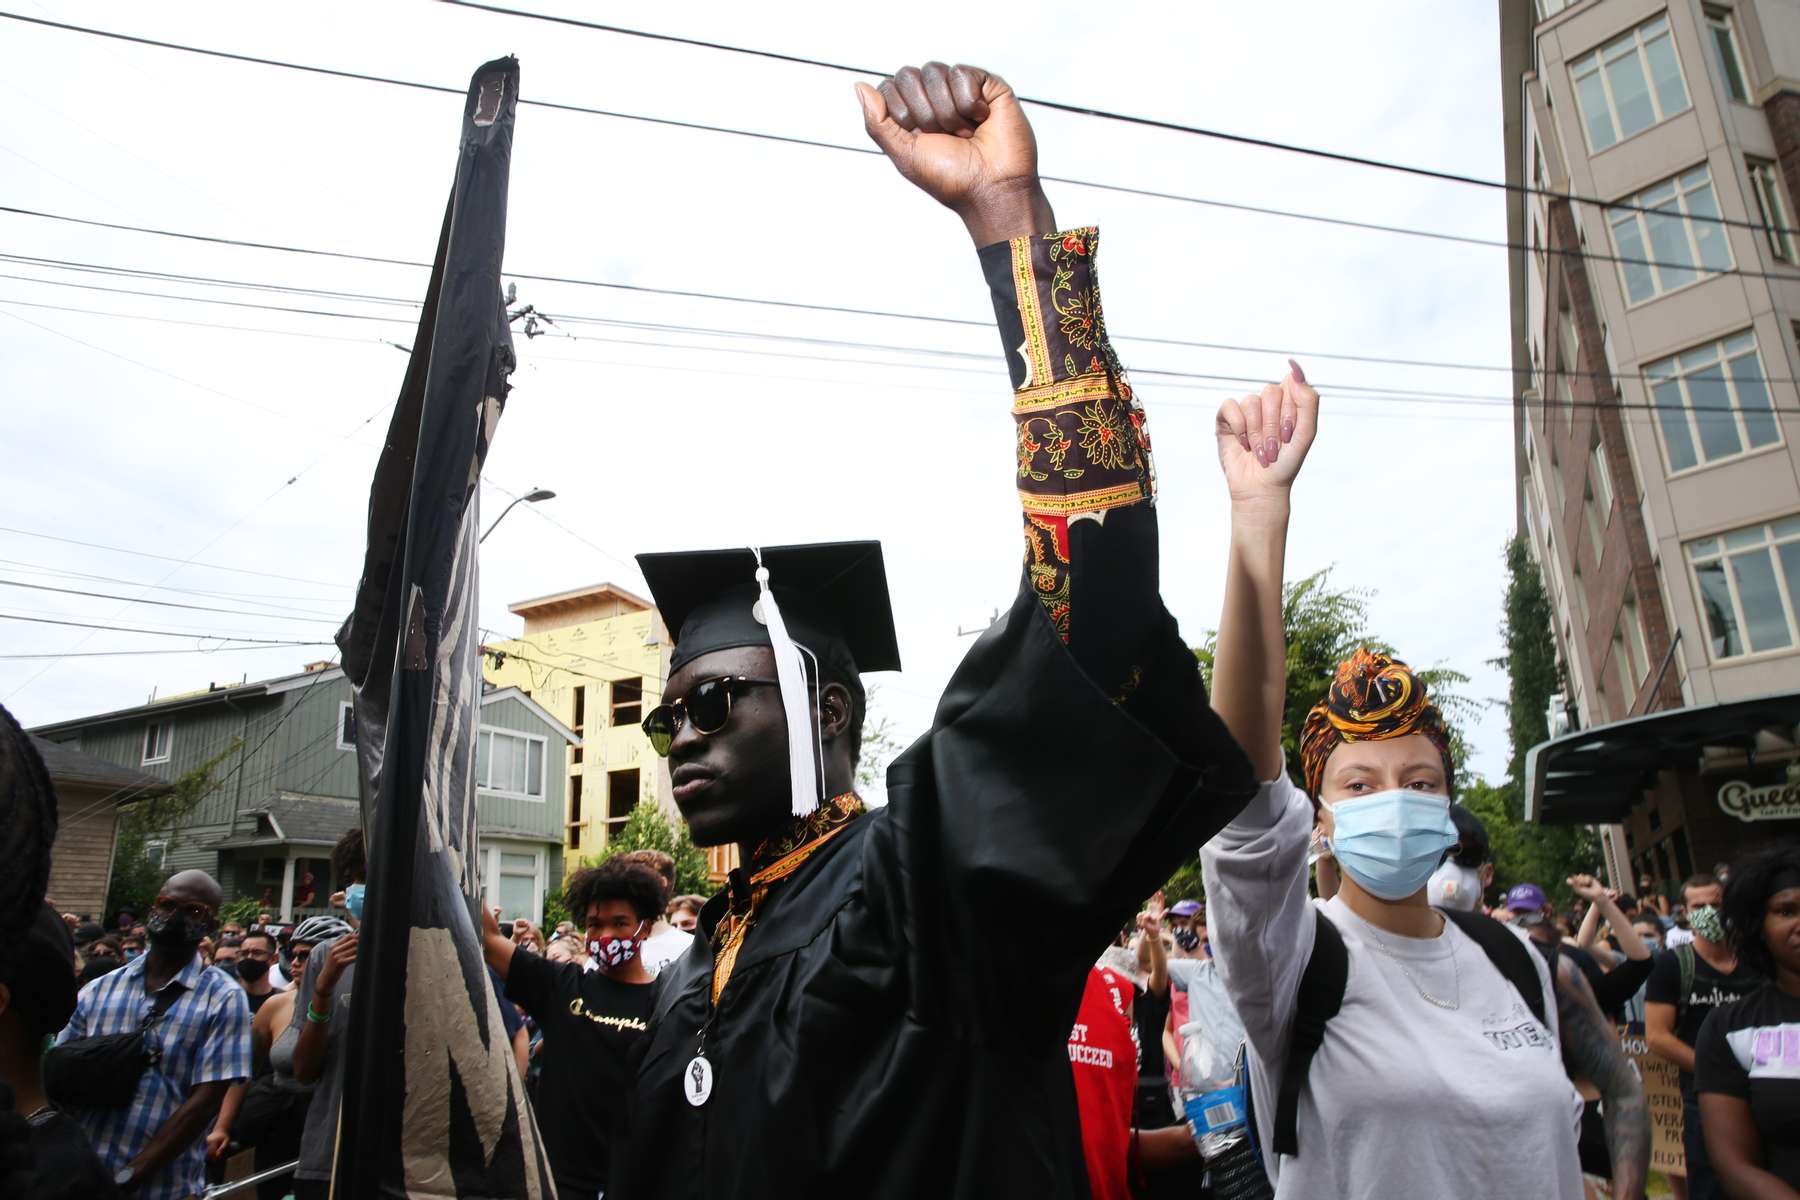 SEATTLE, WA - JUNE 19: Latio Cosmos (L), who recently graduated from Seattle University with a degree in public affairs, participates in the Juneteenth Freedom March and Celebration  on June 19, 2020 in Seattle, Washington. Juneteenth commemorates June 19, 1865, when a Union general read orders in Galveston, Texas stating all enslaved people in Texas were free according to federal law. (Photo by Karen Ducey/Getty Images)